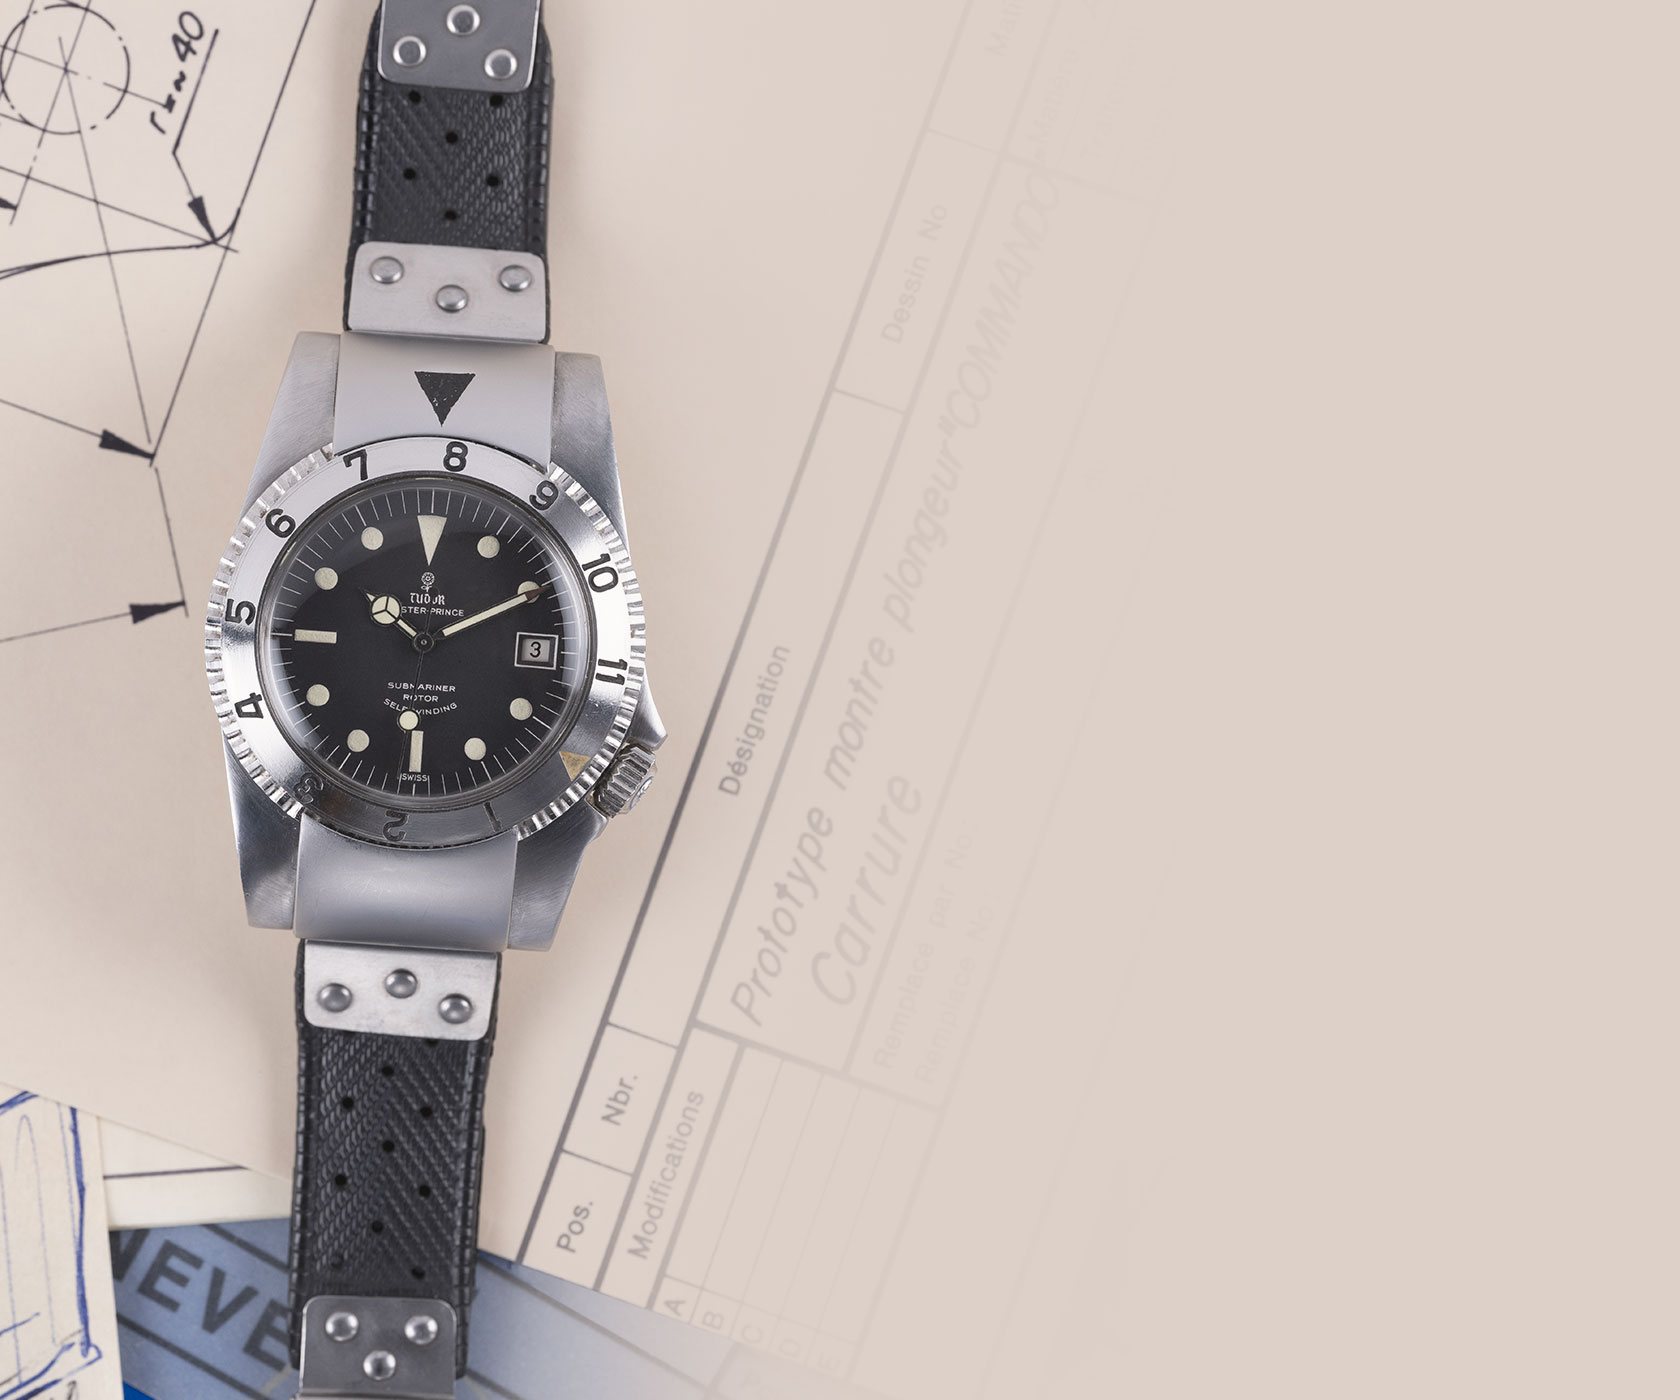 Baselworld 2019: My Hands-On Opinion of the New Tudor Black Bay P01